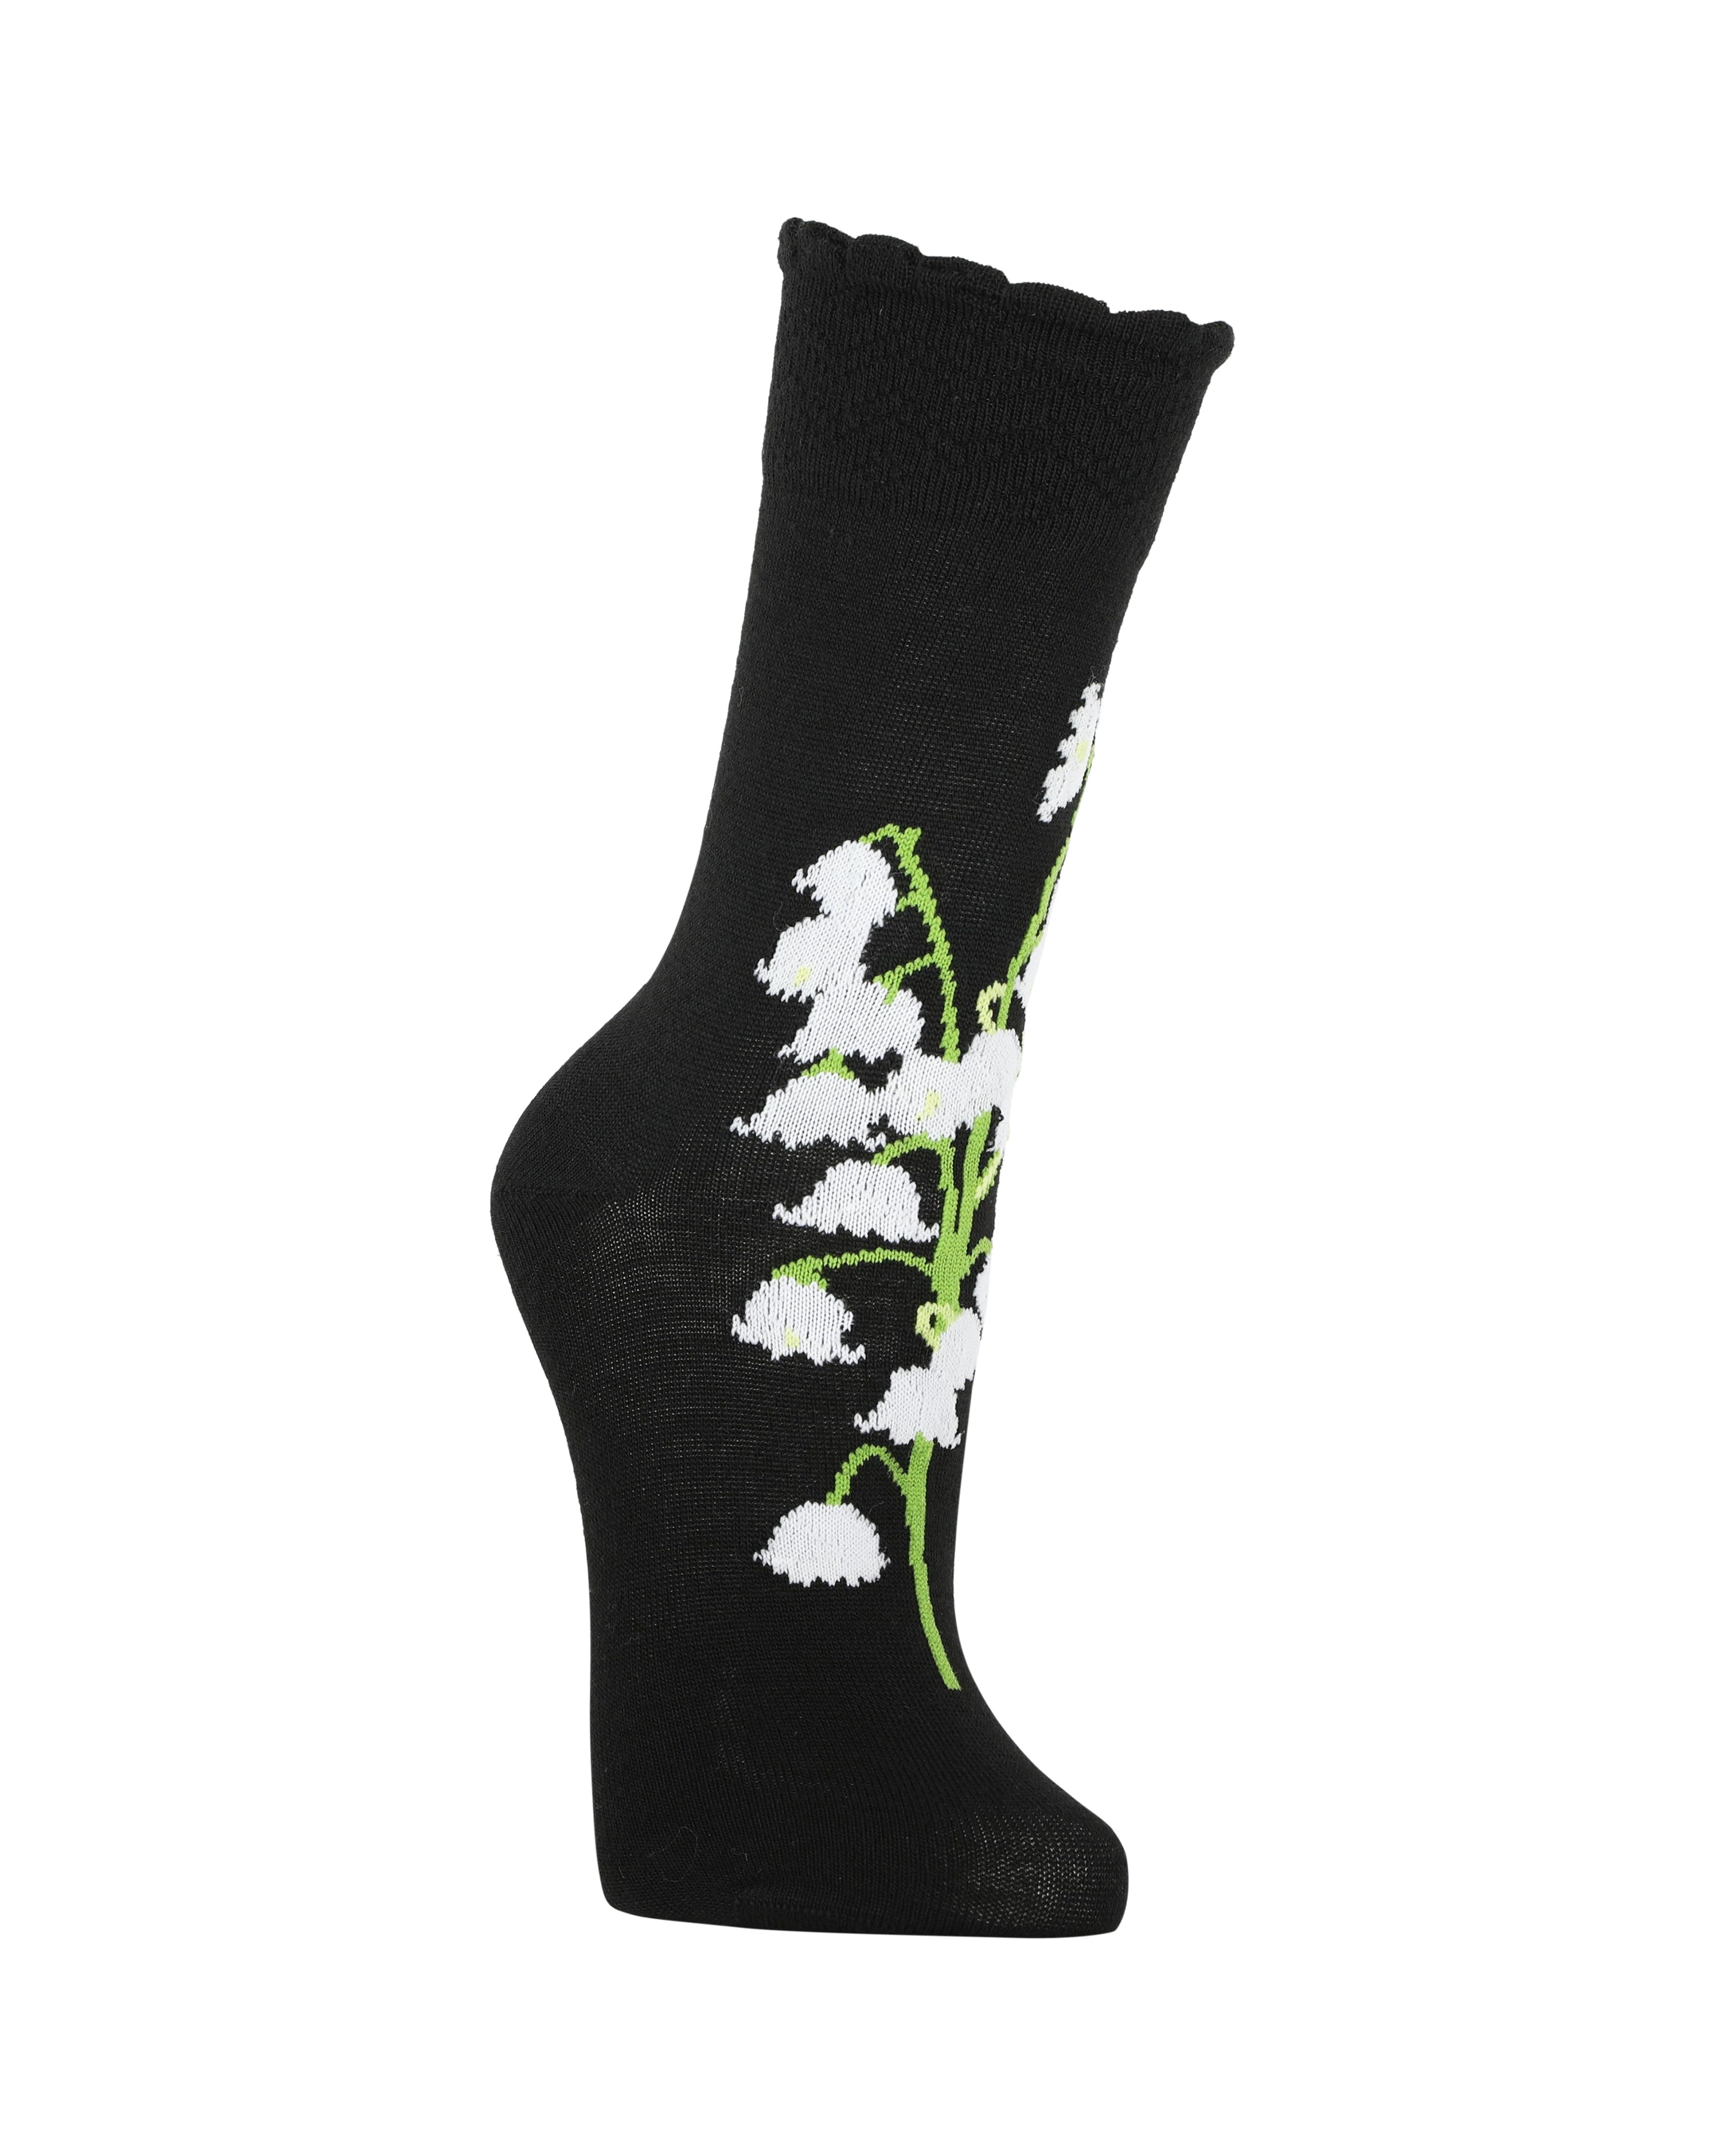 Socks Lily of the Valley - 1